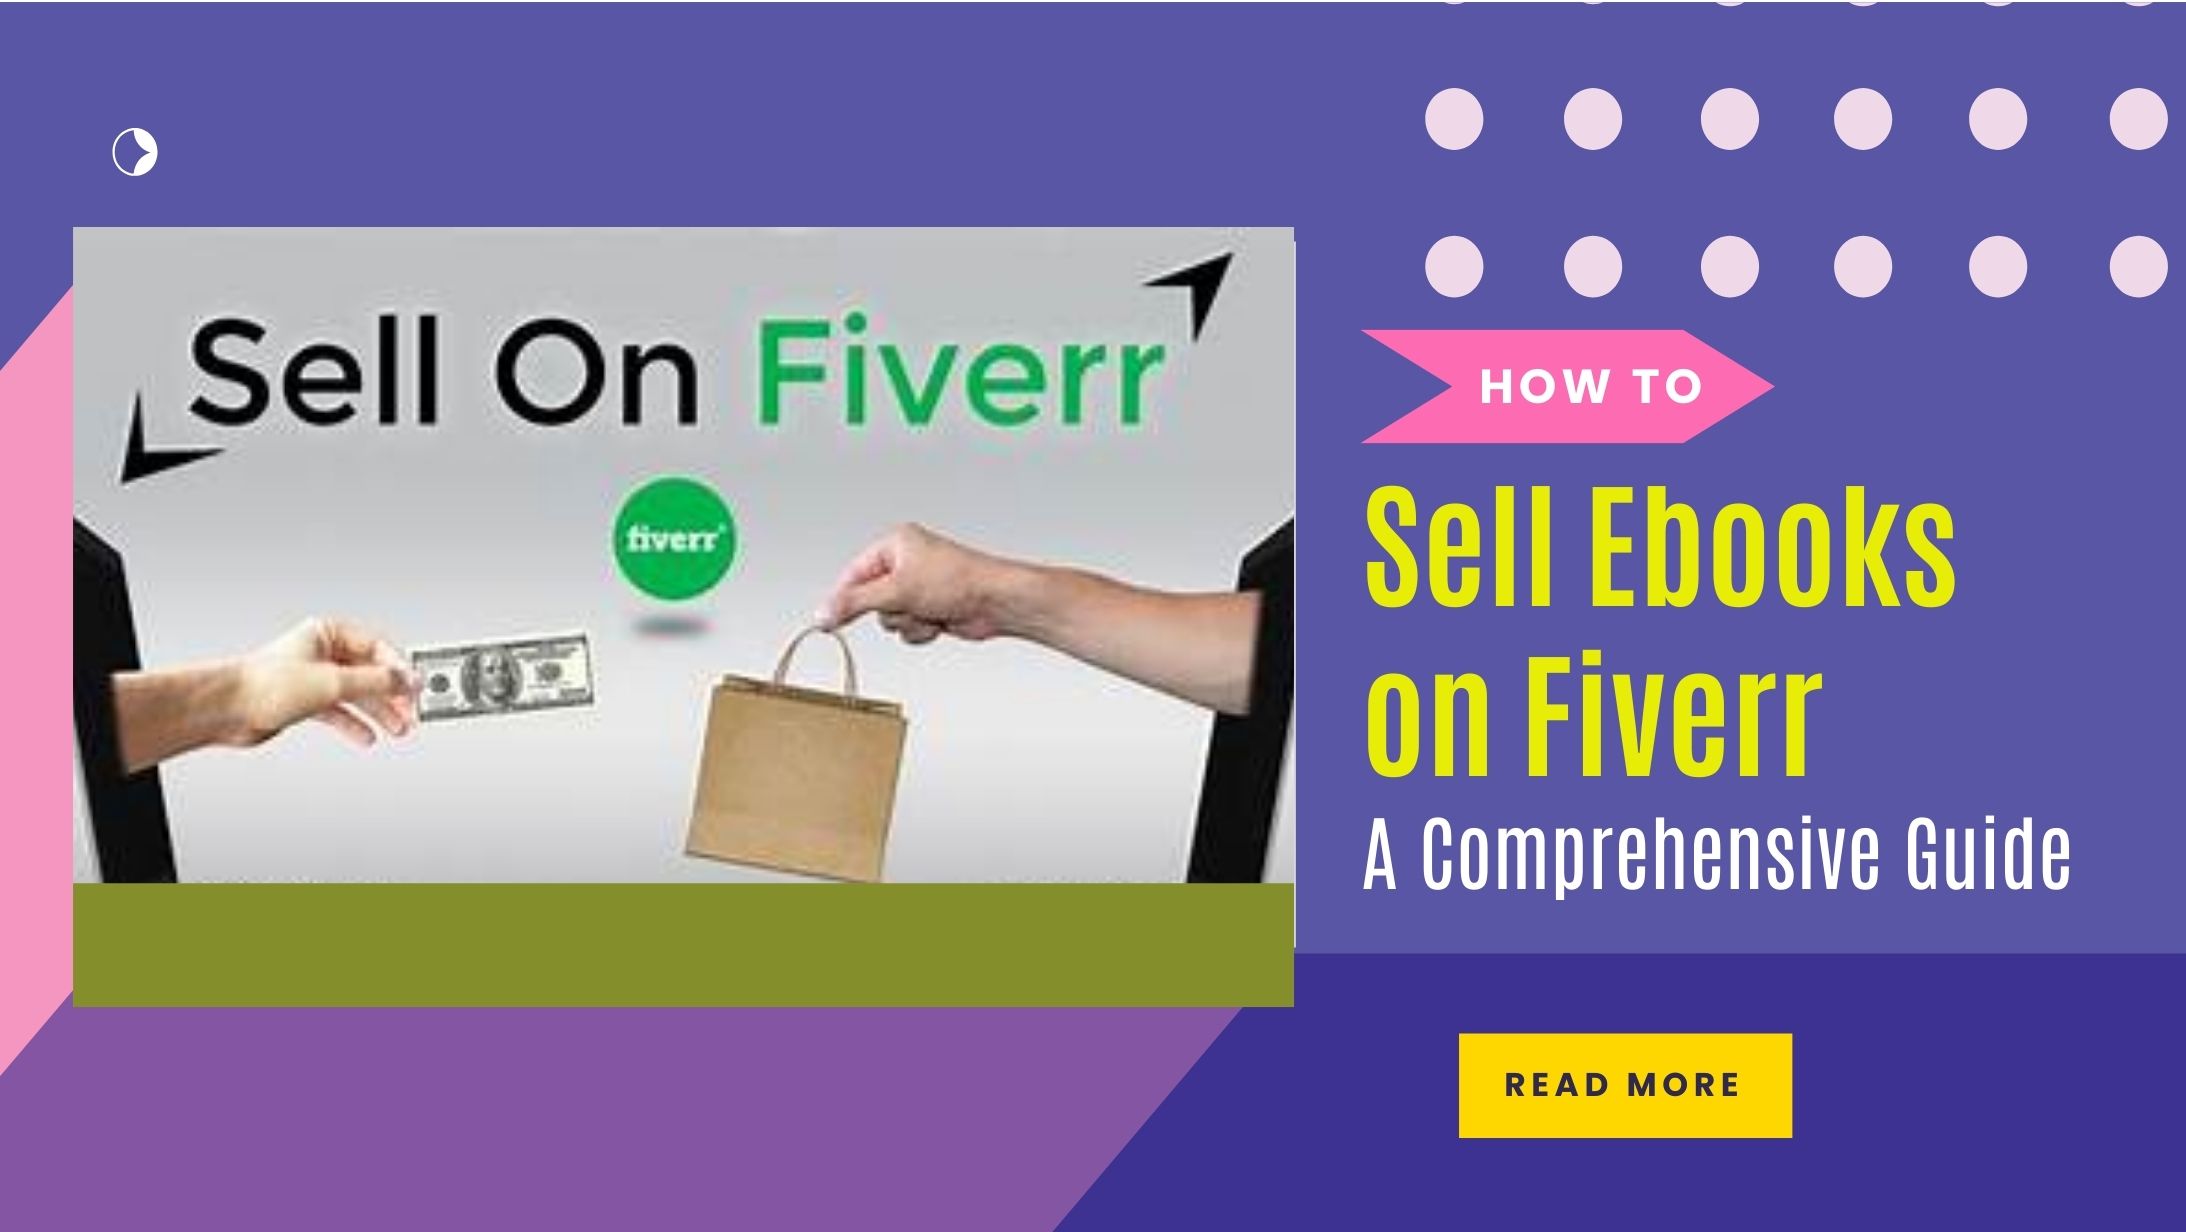 How to Sell Ebooks on Fiverr: A Comprehensive Guide